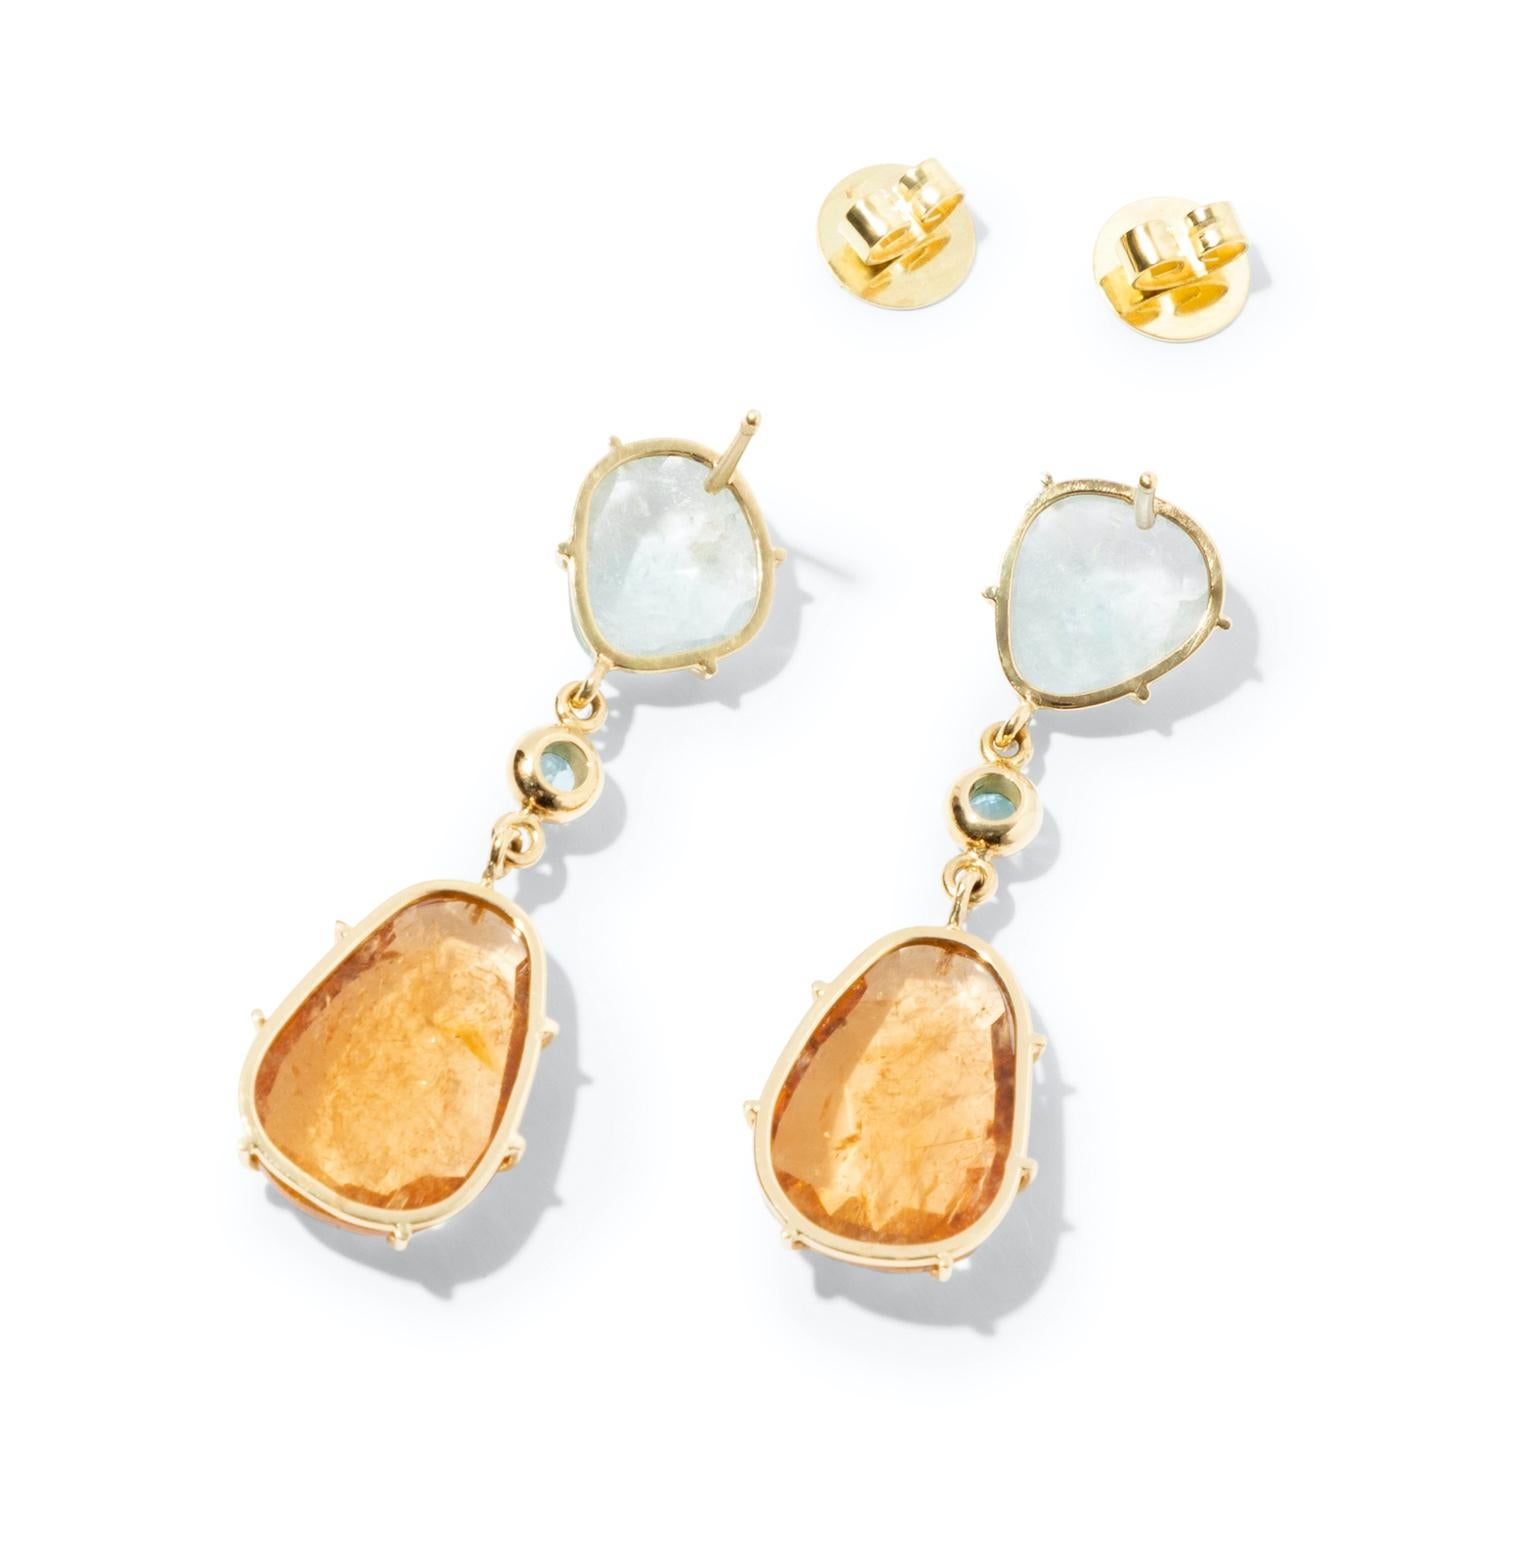 18k gold tourmaline drop earrings in an unusual shade of saturated orange and sky blue. 
These vibrant colors combined with the random cut of the gemstones will lend a boho chic vibe to your wardrobe. Two sparkling blue brilliant cut topaz gemstones